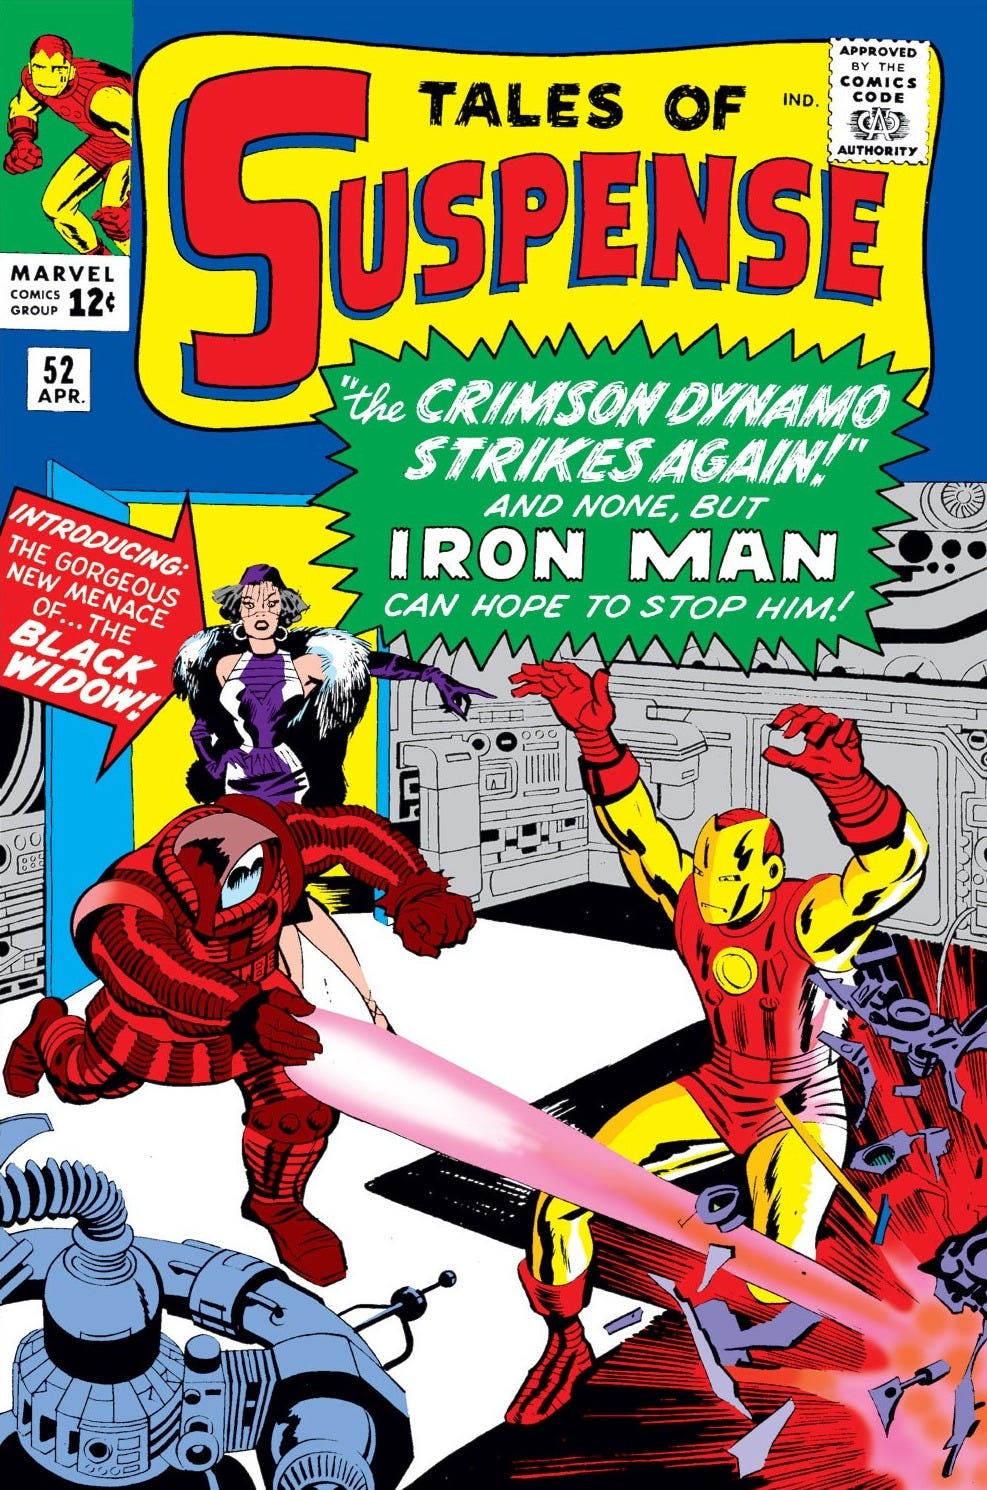 Cover image for the 1964 comics Tales of Suspense #52 showing the first appearance of Black Widow, who wears a purple dress and has black hair. Fighting in the foreground are Iron Man and the Crimson Dynamo.